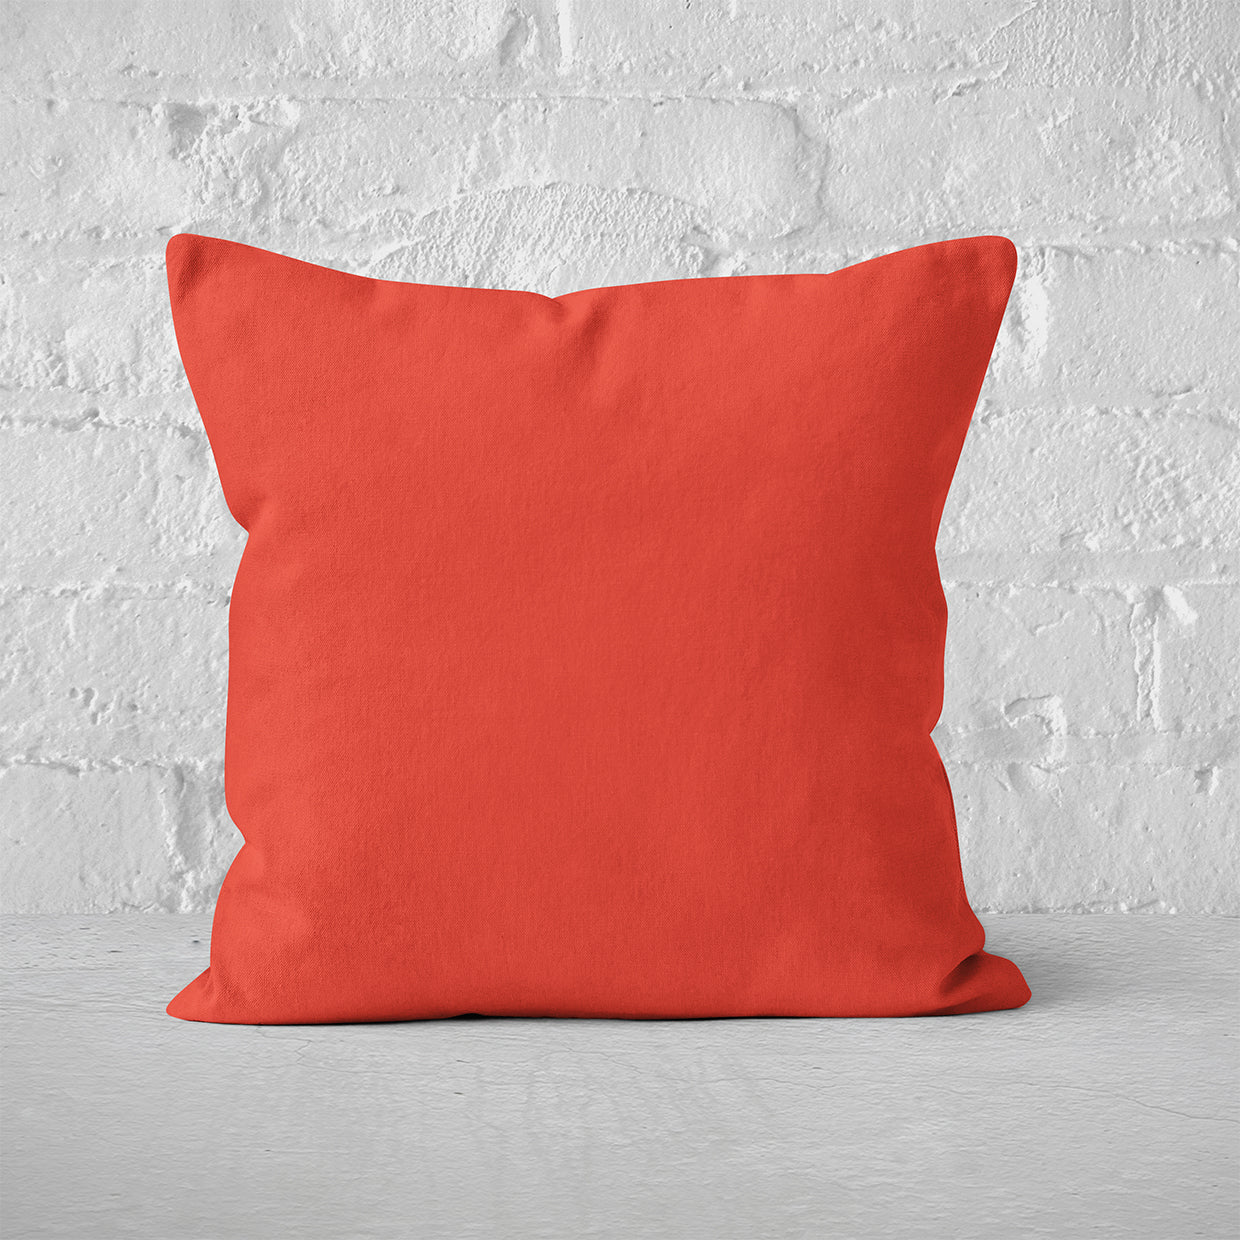 Pillow Cover Art Feature 'Solid' - Red - Cotton Twill